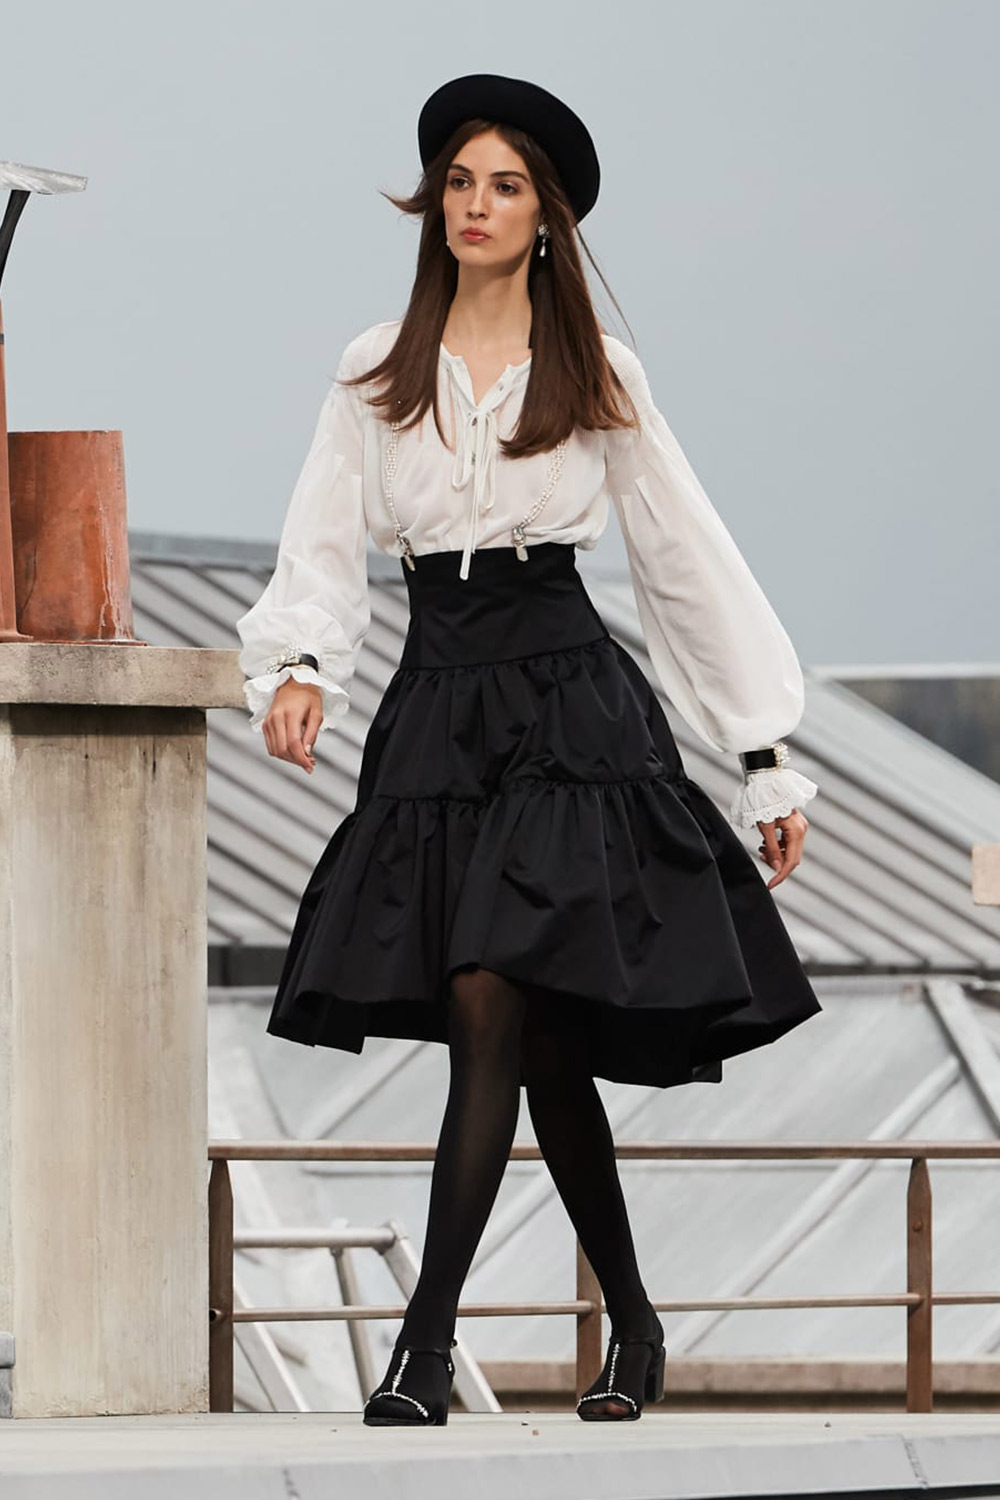 The 15 Best Chanel Outfits, From the Runway to Street Style | Who What Wear